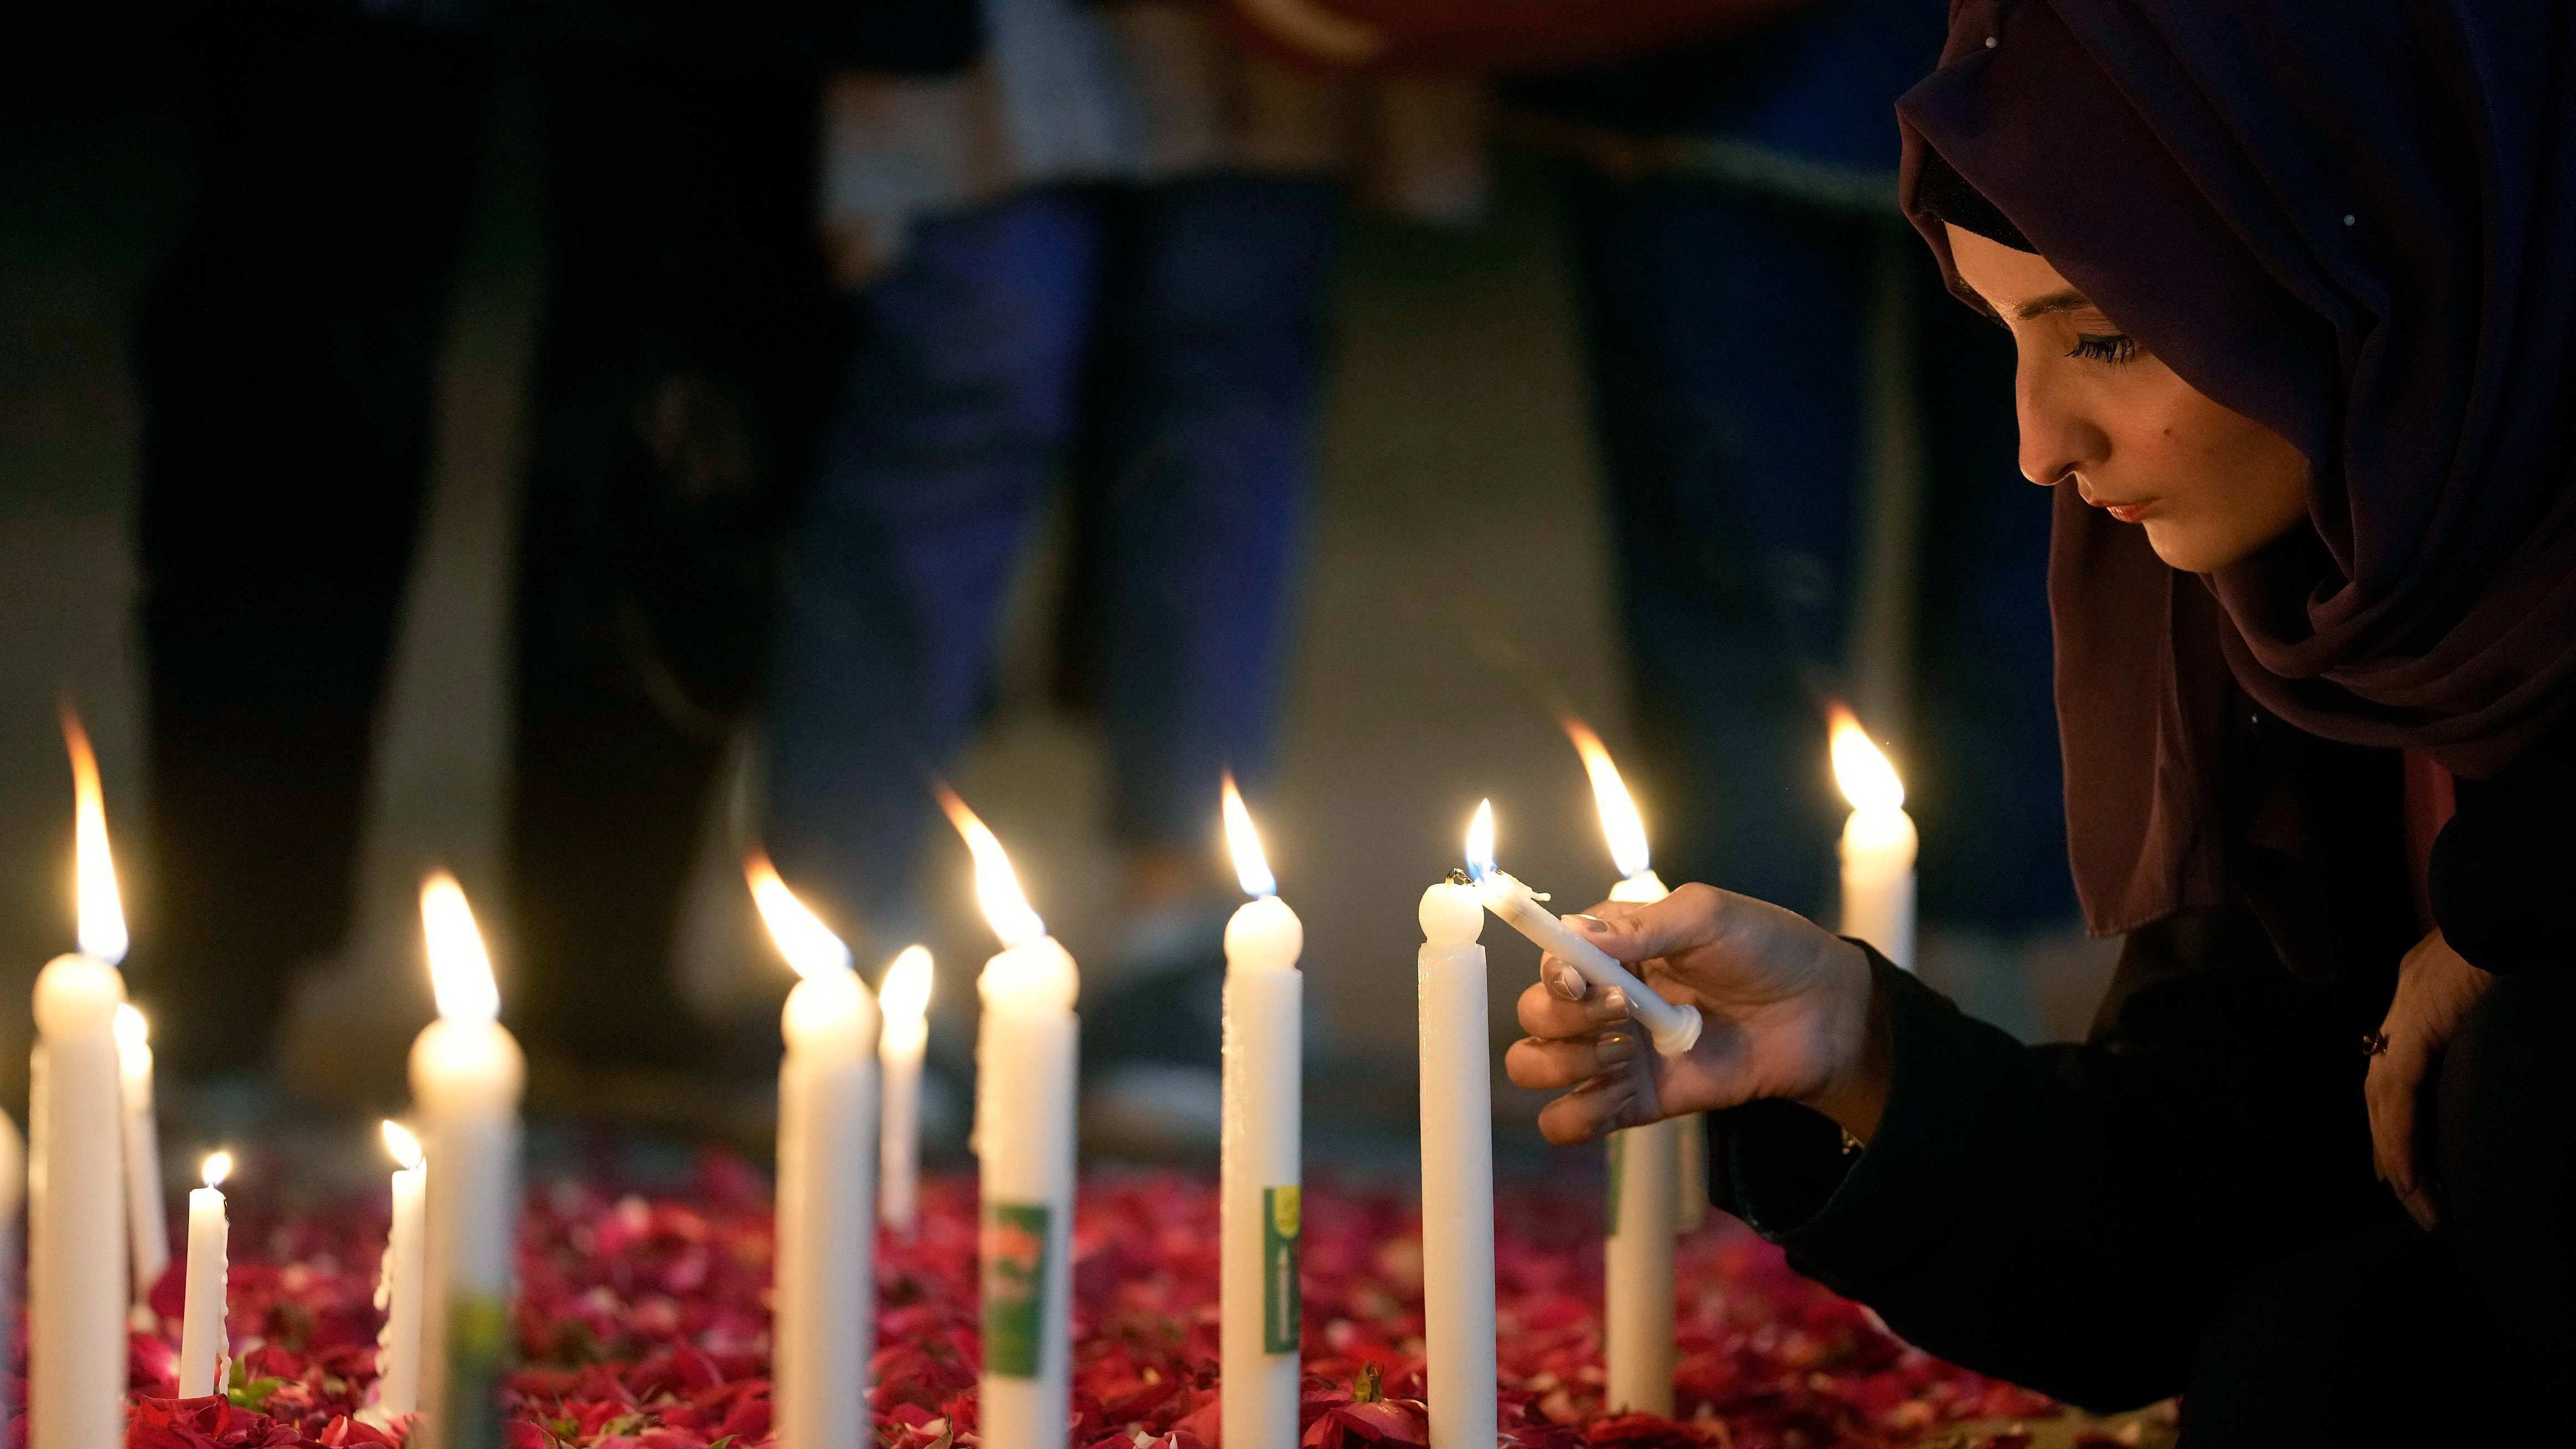 A woman light candles during a candle light vigil for the victims of earthquake in Syria and Turkey, in Islamabad, Pakistan, Monday, Feb. 6, 2023. A powerful 7.8 magnitude earthquake has rocked wide swaths of Turkey and Syria. It toppled hundreds of buildings and killed more than 1,900 people. Credit: AP Photo